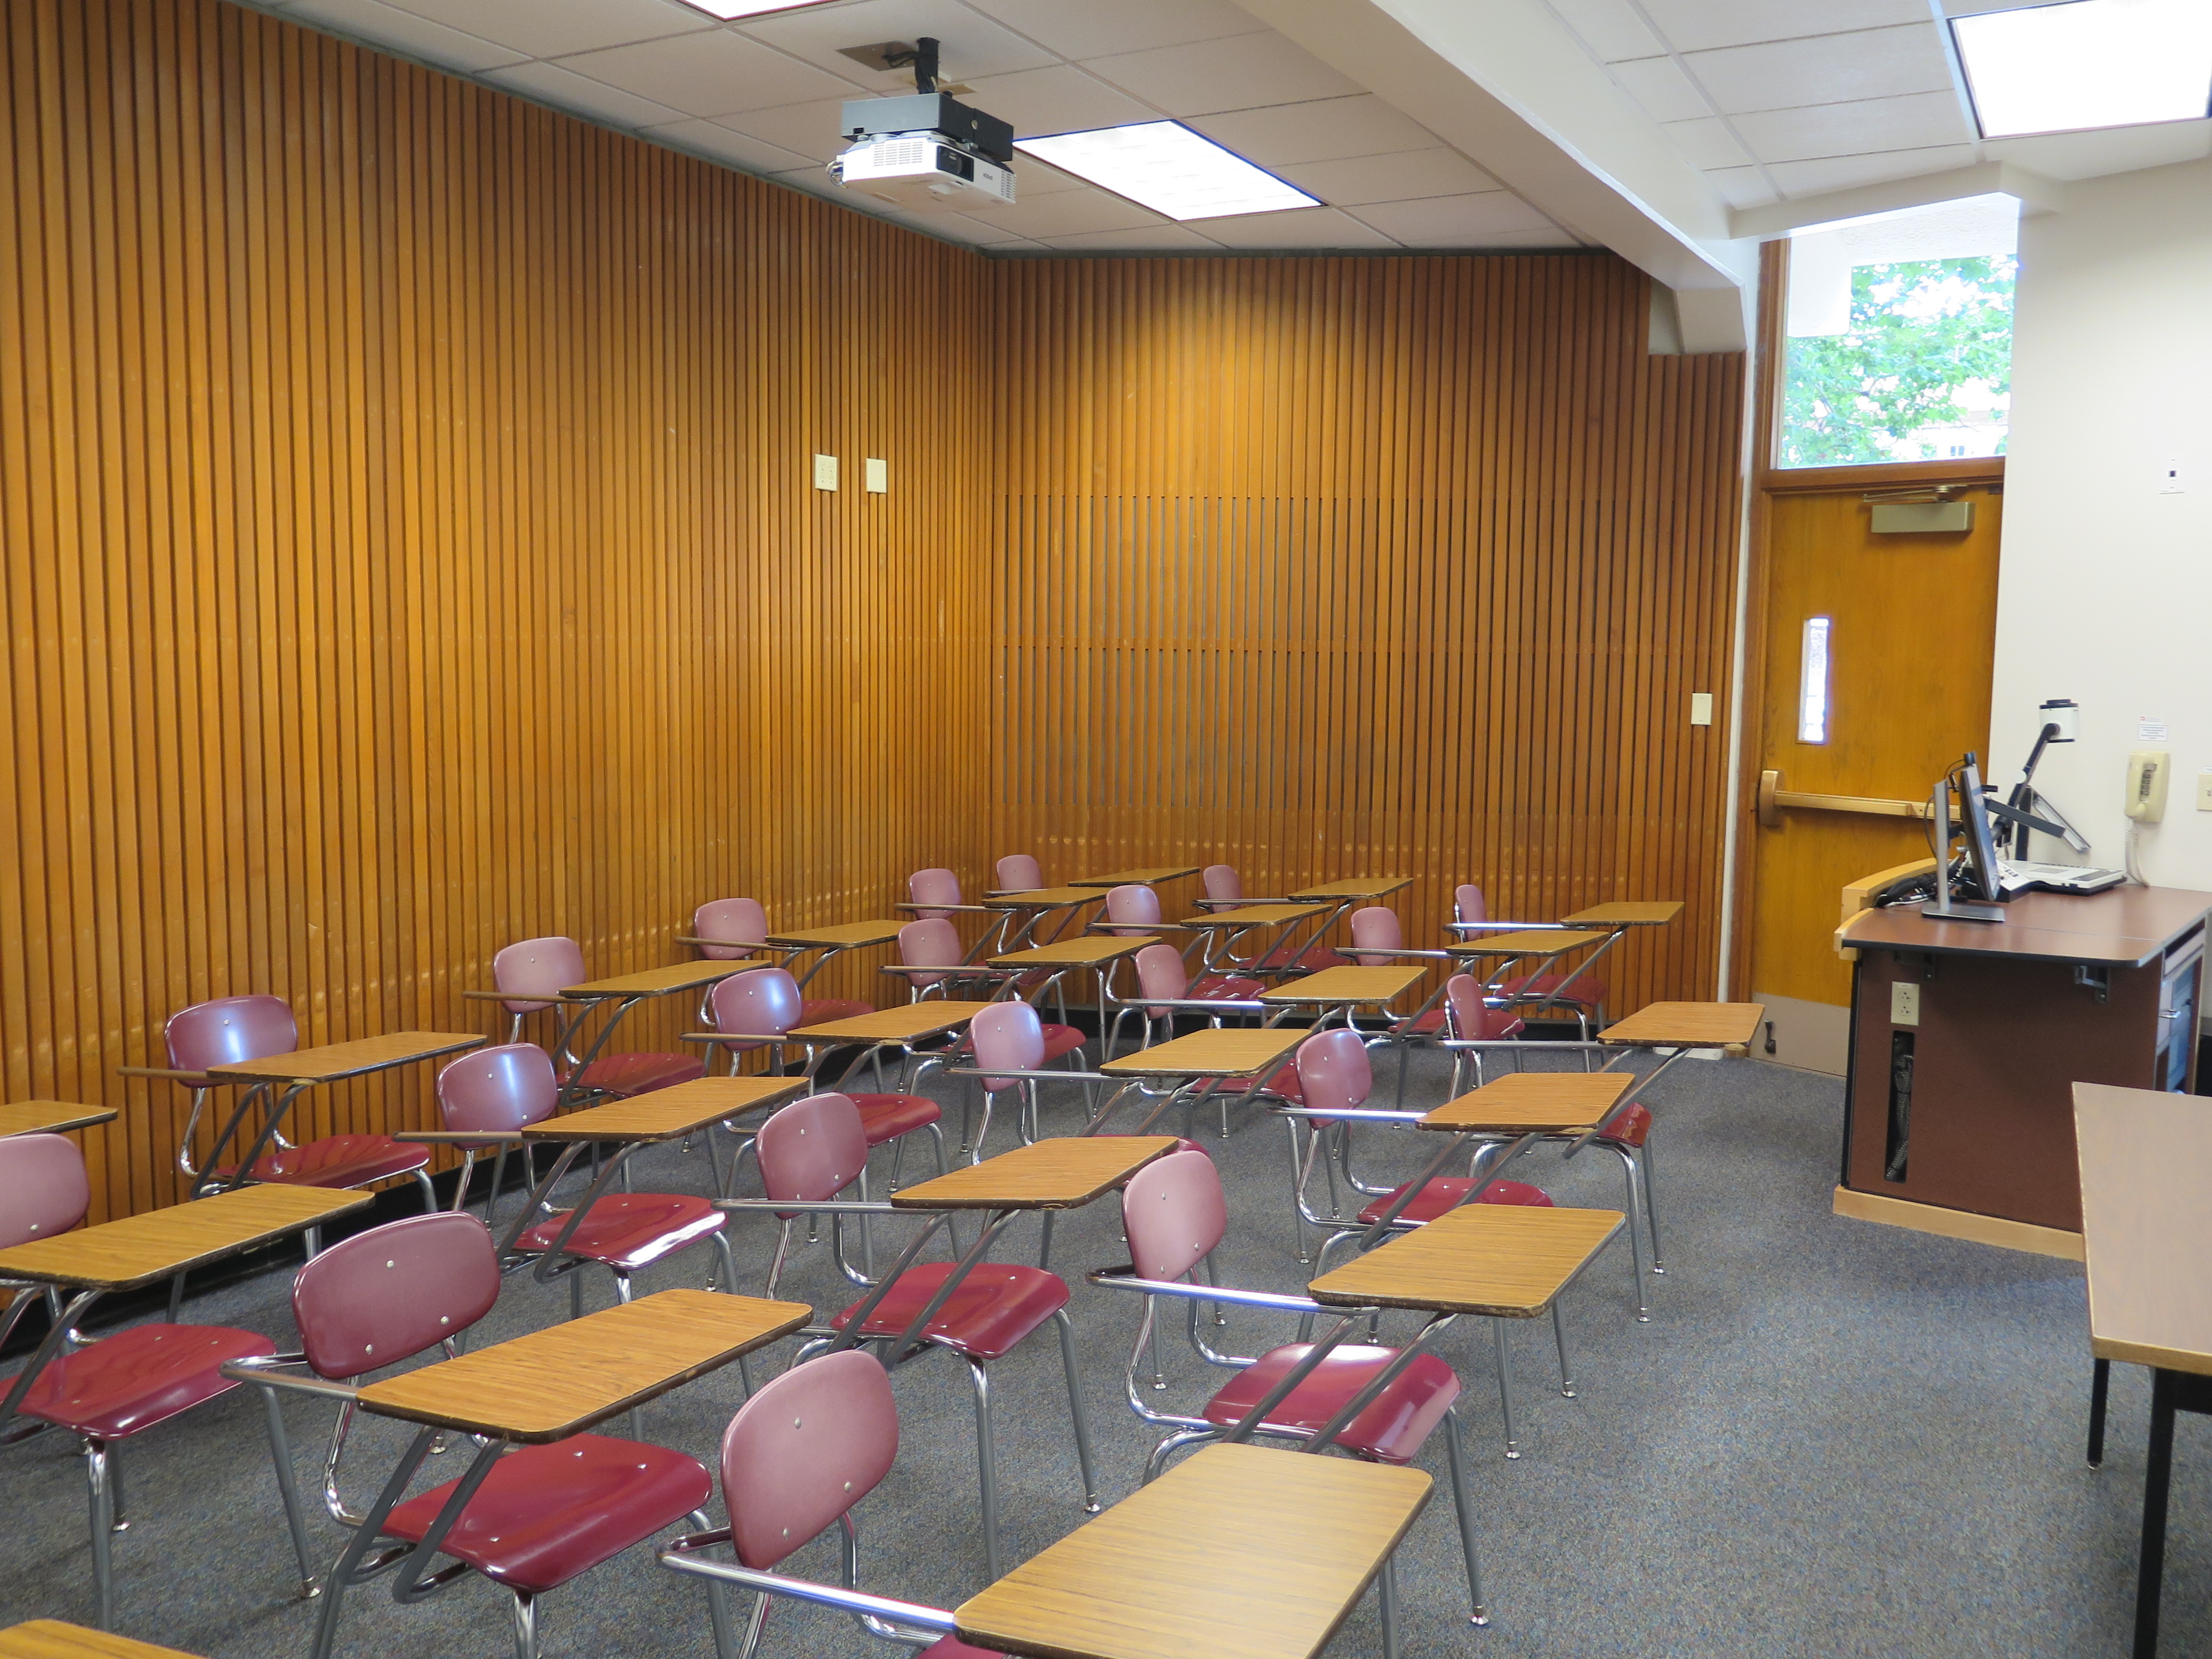 Room Consists of Carpet floors, moveable tables and chairs, a white board and podium are both located at the front of the room.